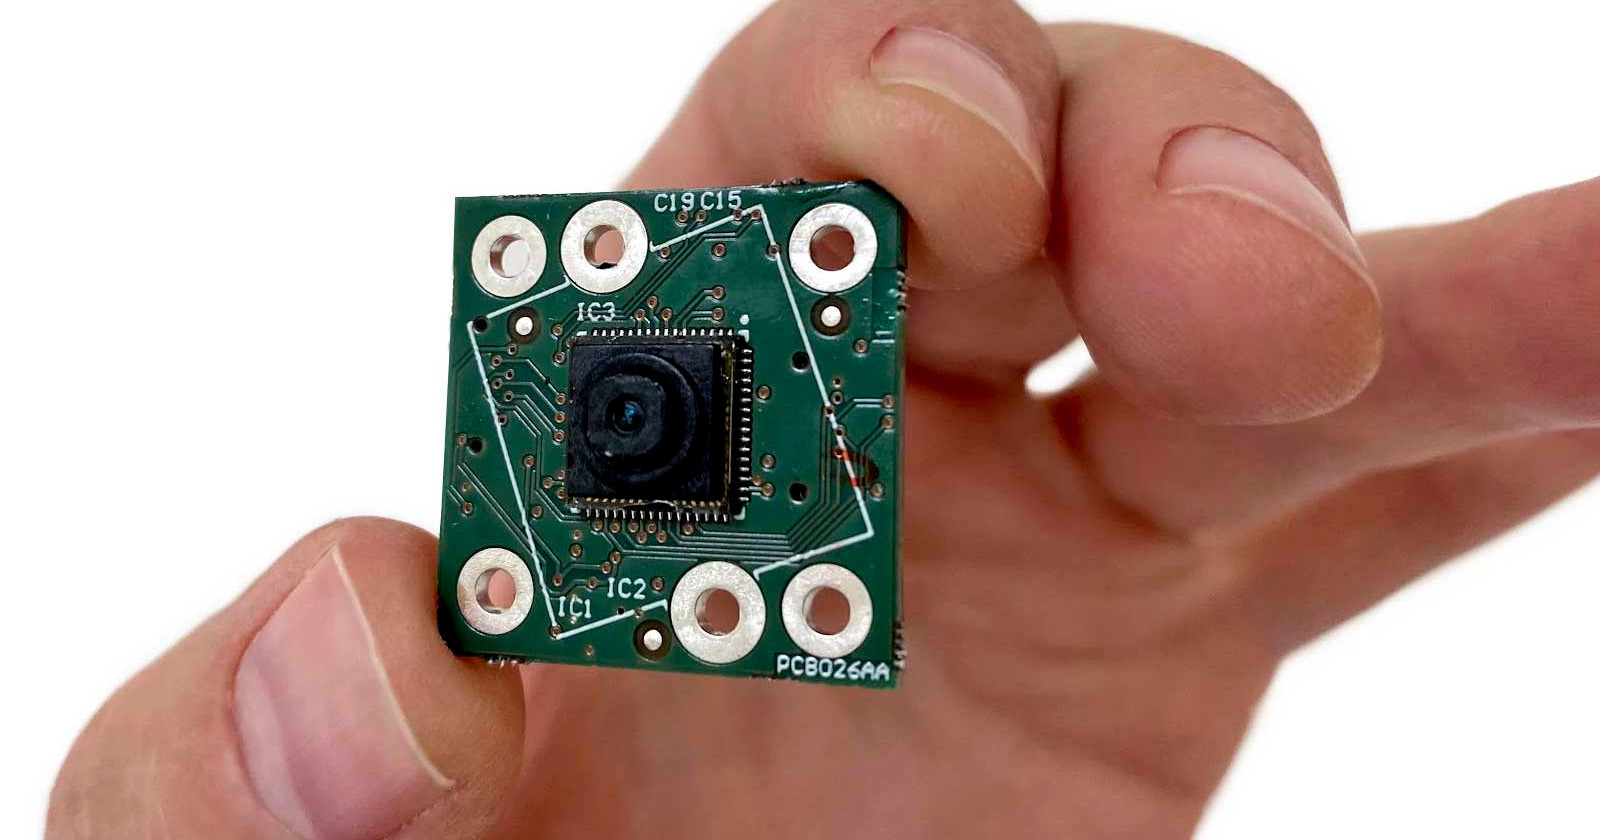 This Tiny Sensor is About to Make Smartphone Photography Way Better